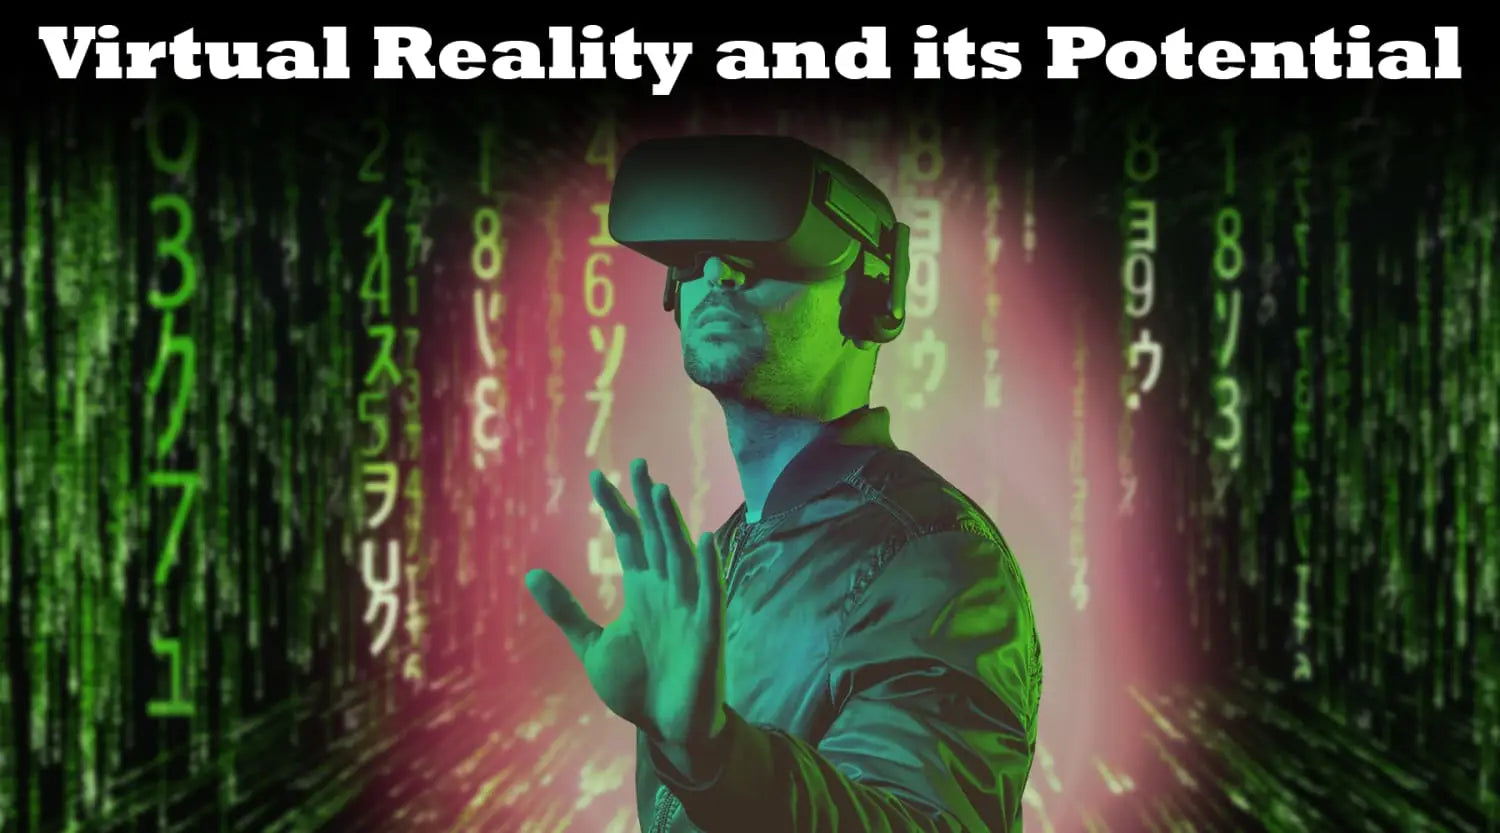 Virtual Reality and its Potential